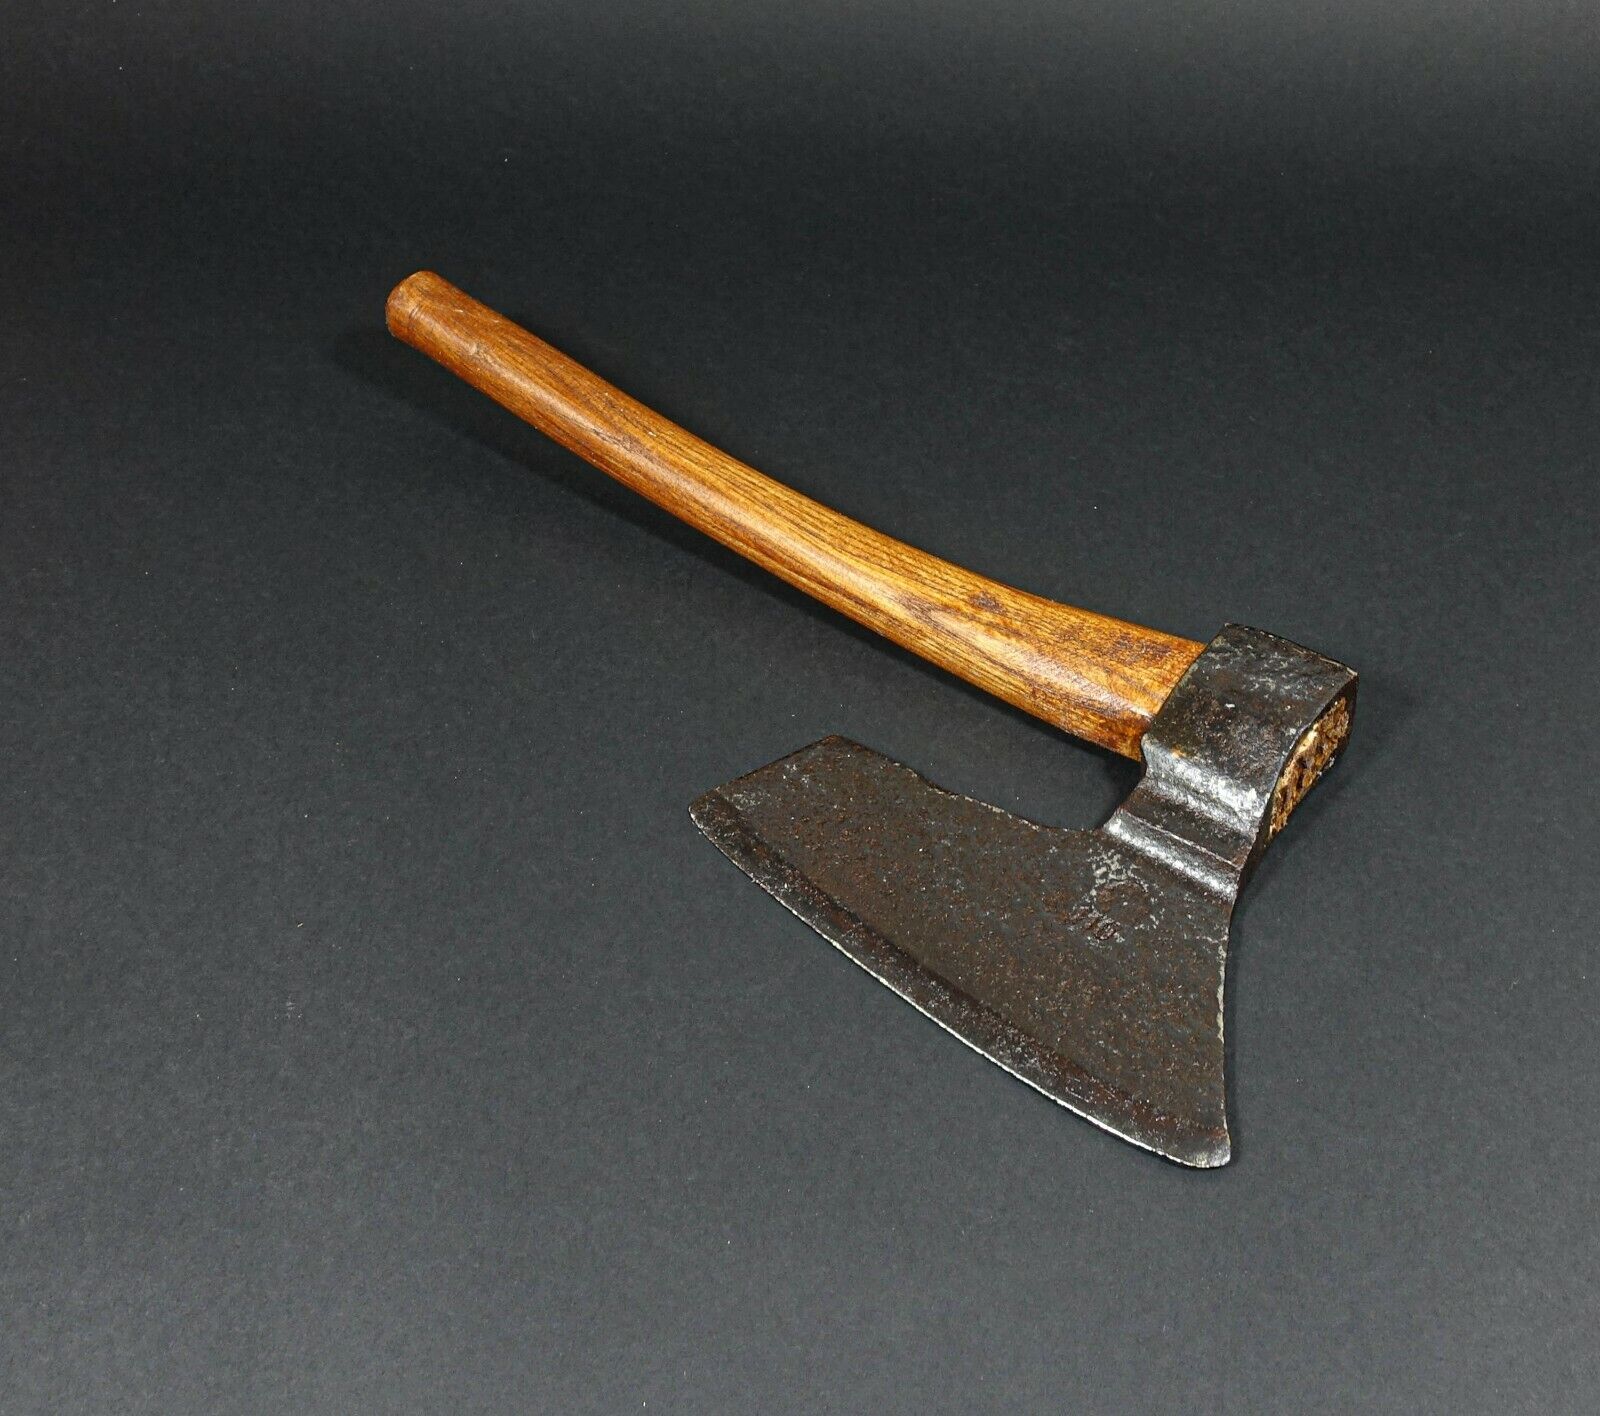 ANTIC Goosewing Bearded Broad Hatchet Axe Head Handmade Forged Rare